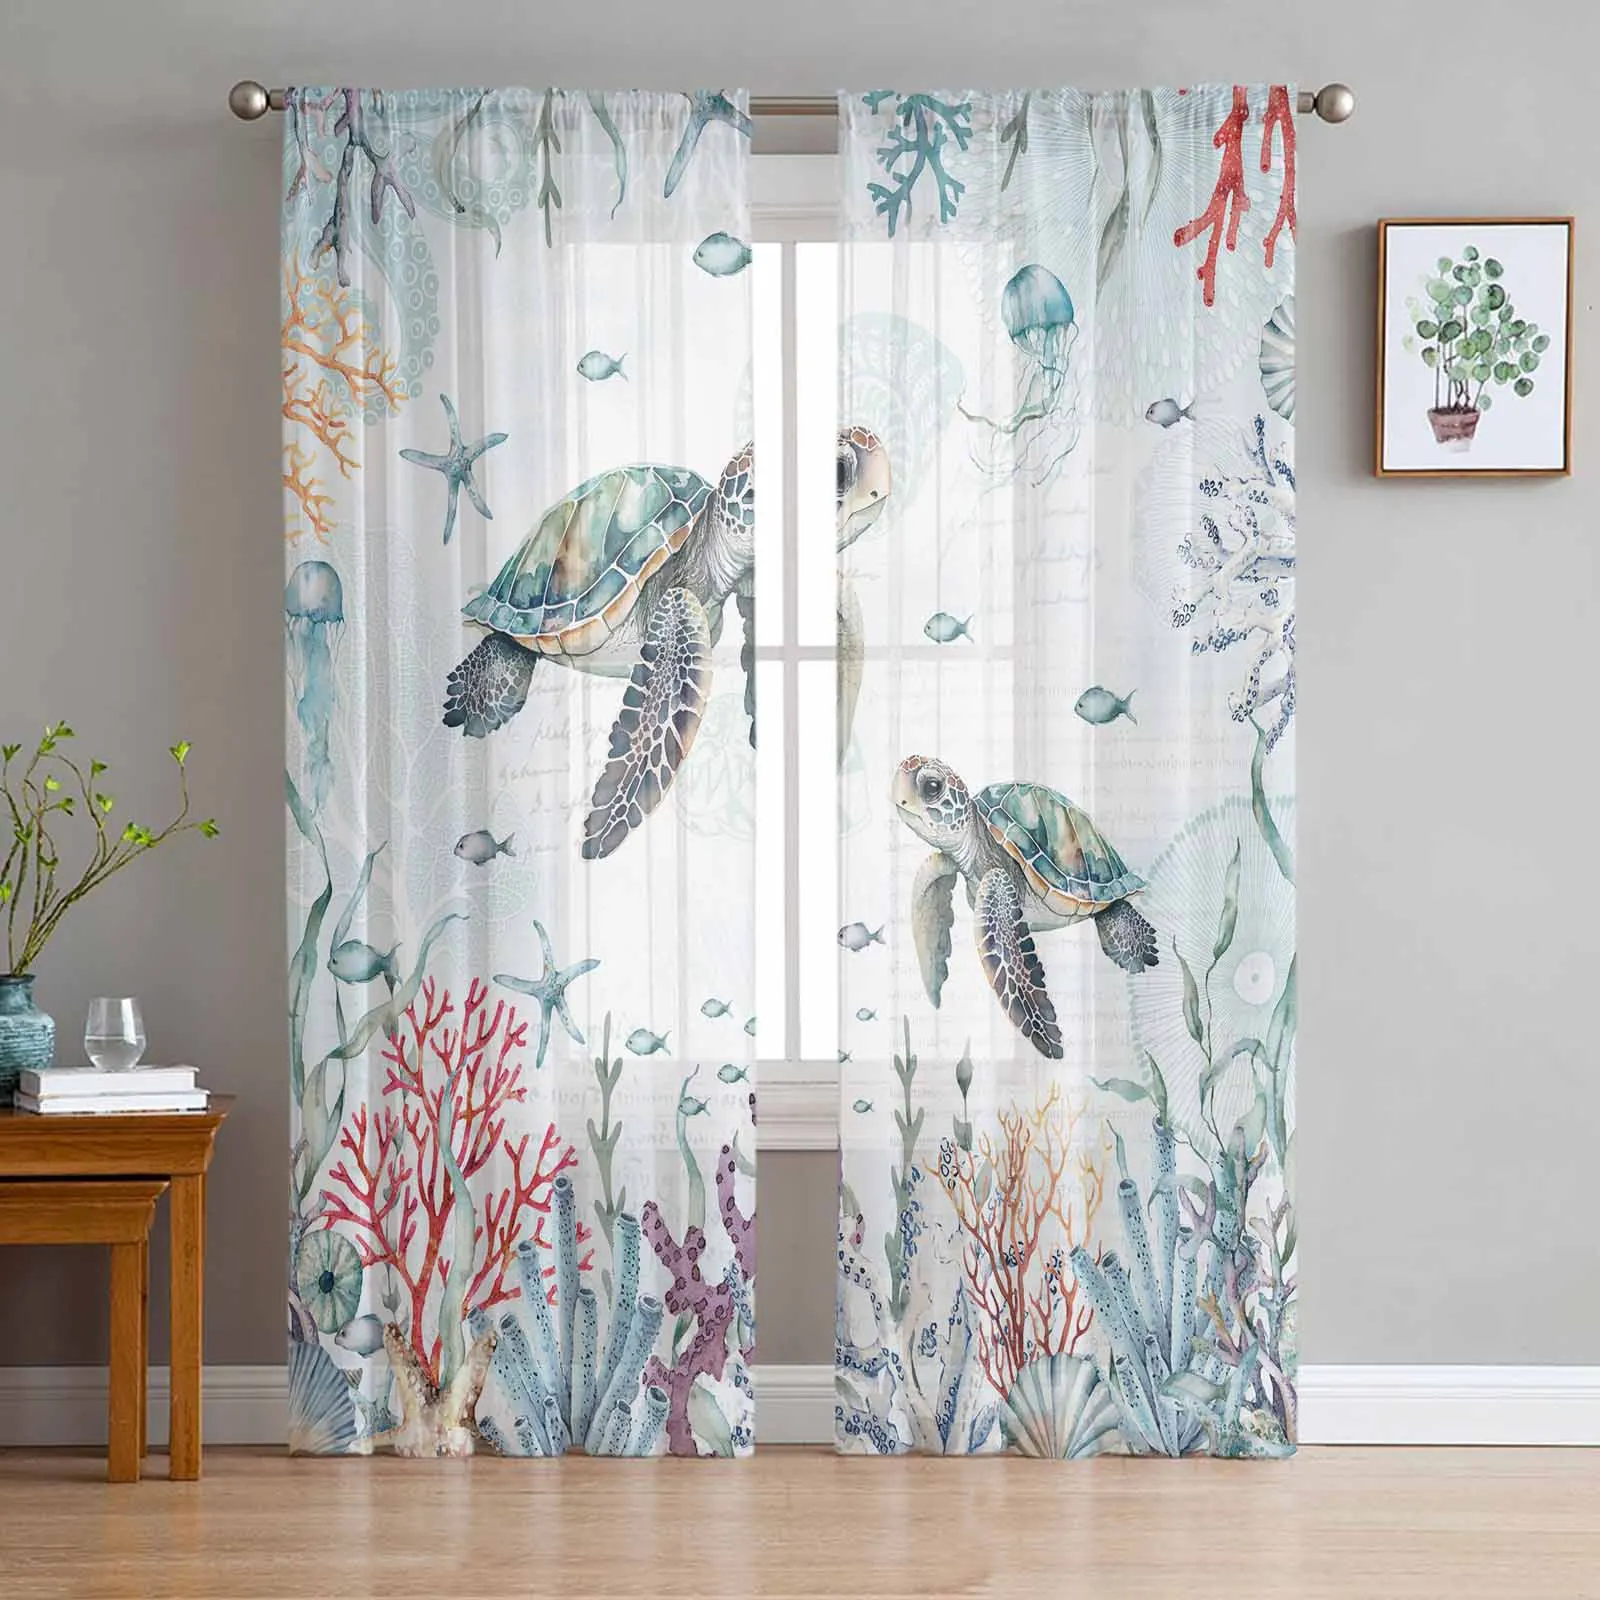 

Summer Ocean Coral Sea Star Sea Turtle Tulle Sheer Window Curtains for Living Room Kitchen Bedroom Voile Hanging Curtain